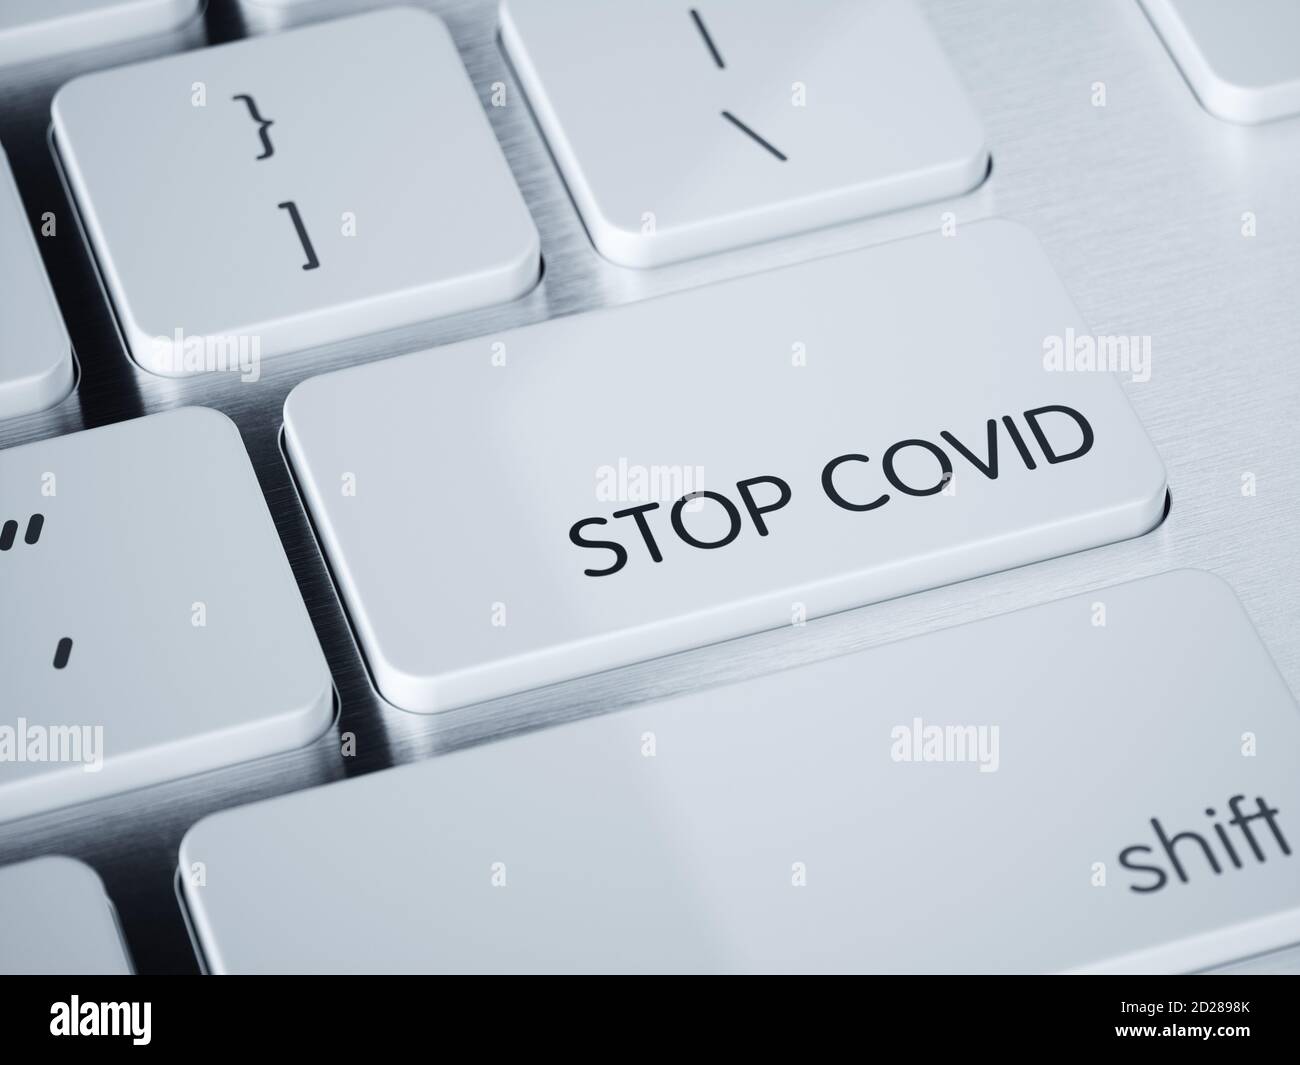 Keyboard with stop covid key. 3d rendering illustration Stock Photo